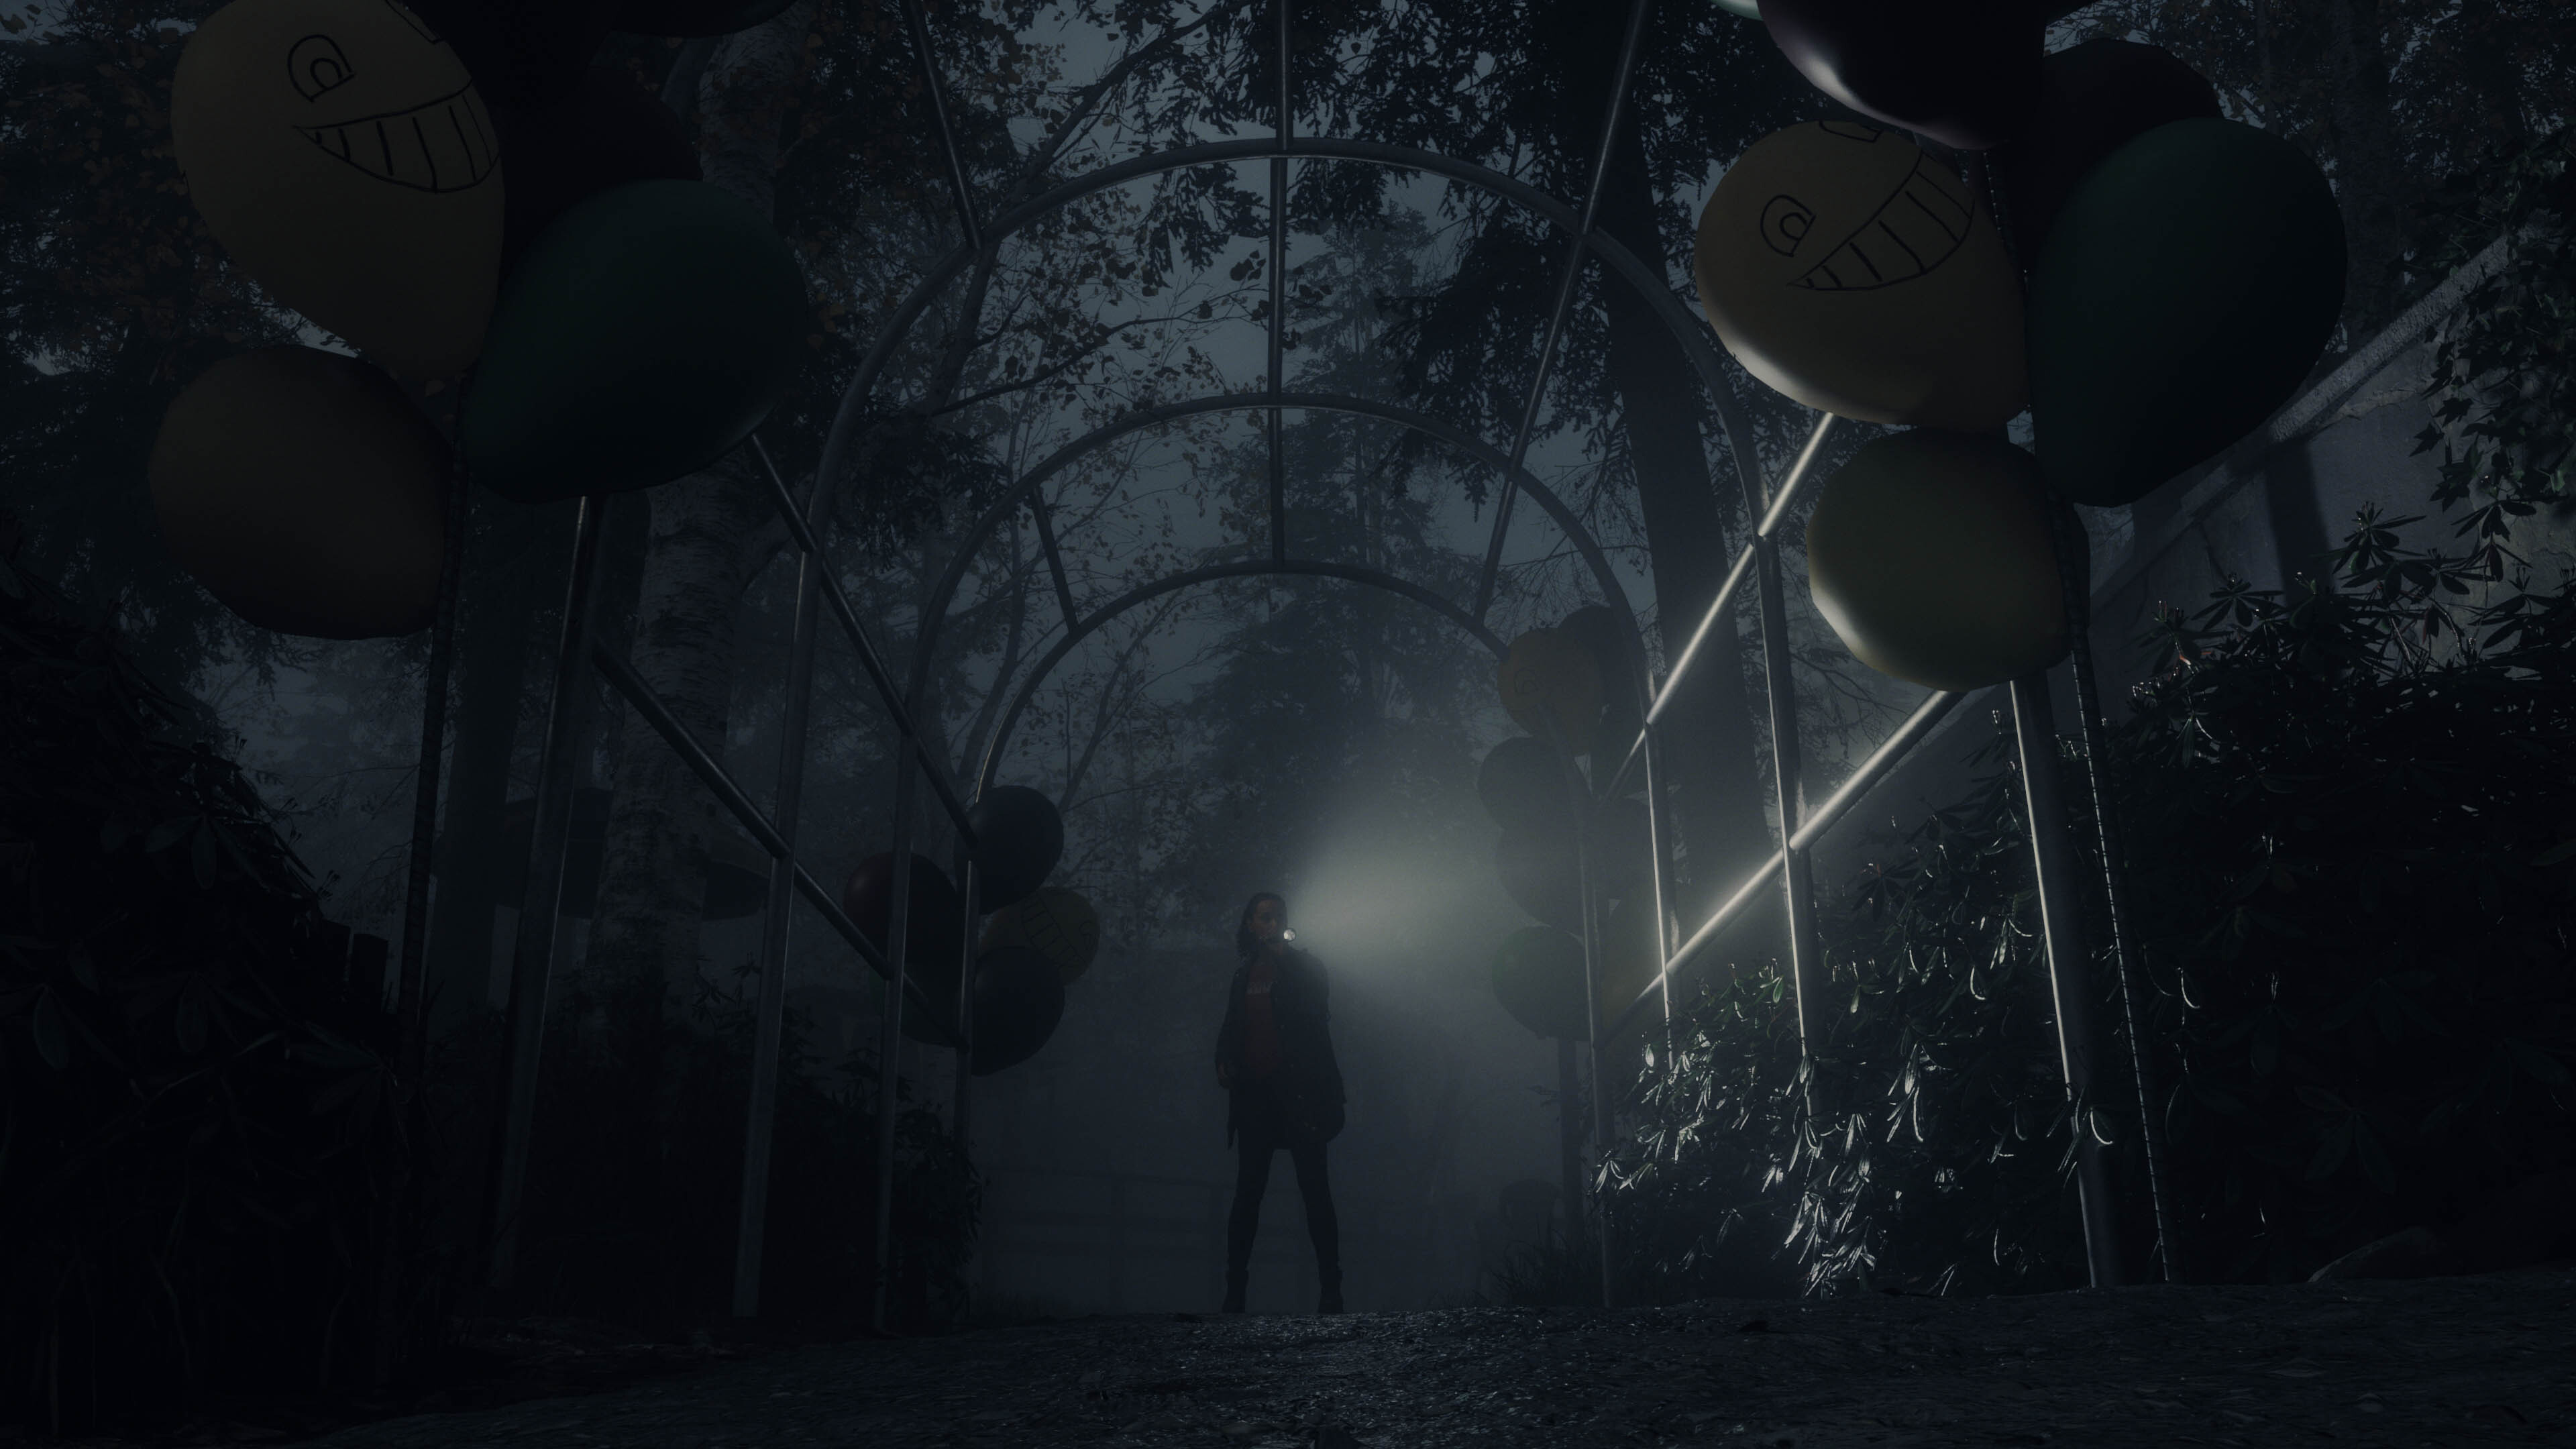 Alan Wake 2 feels like Remedy's attempt to combine the best games